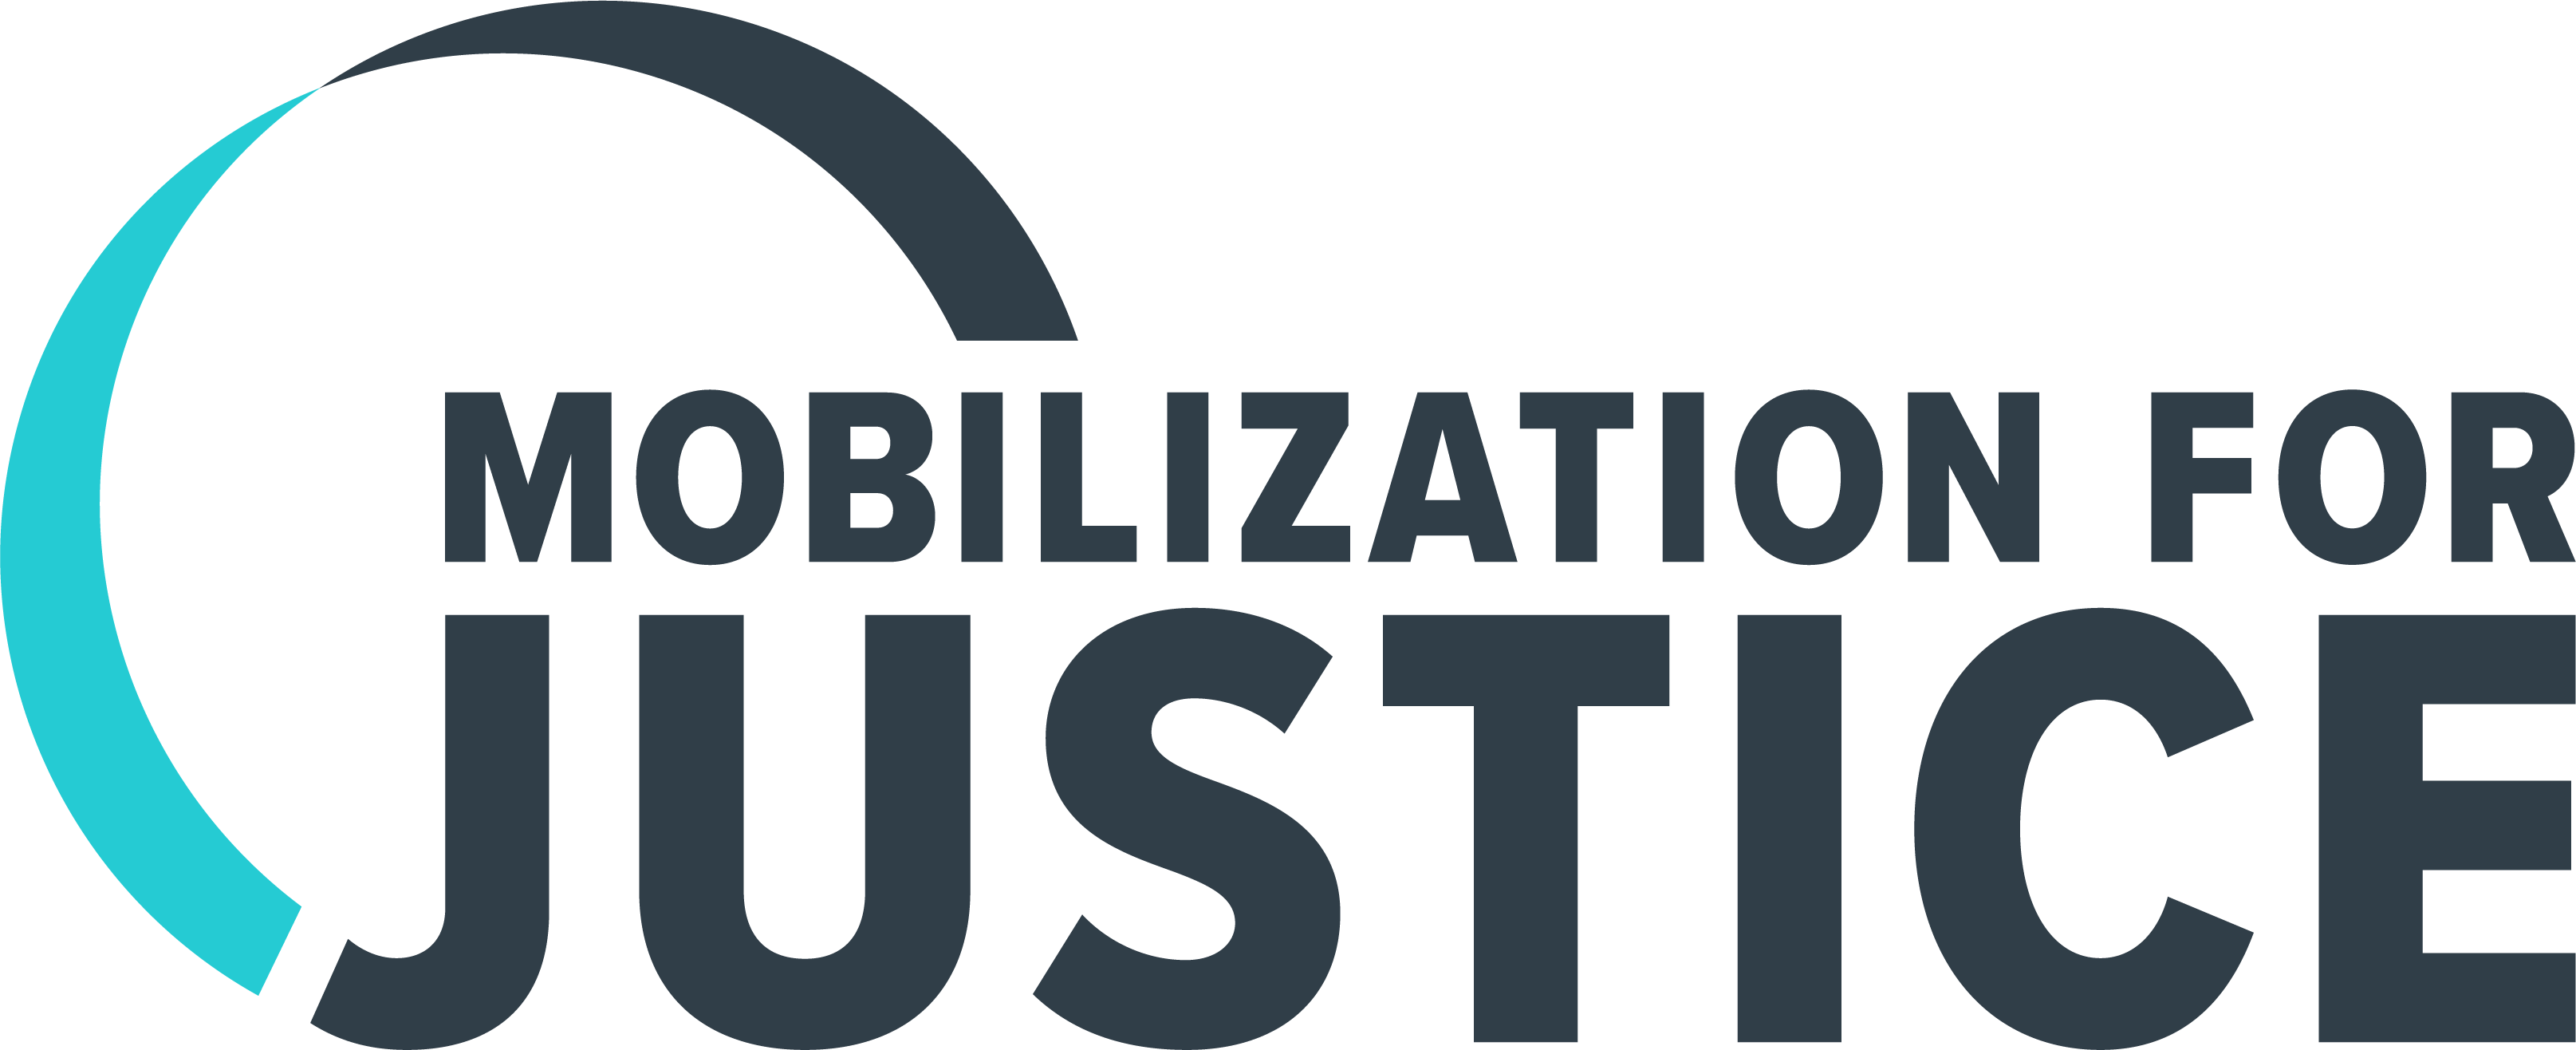 Mobilization for Justice, Inc.